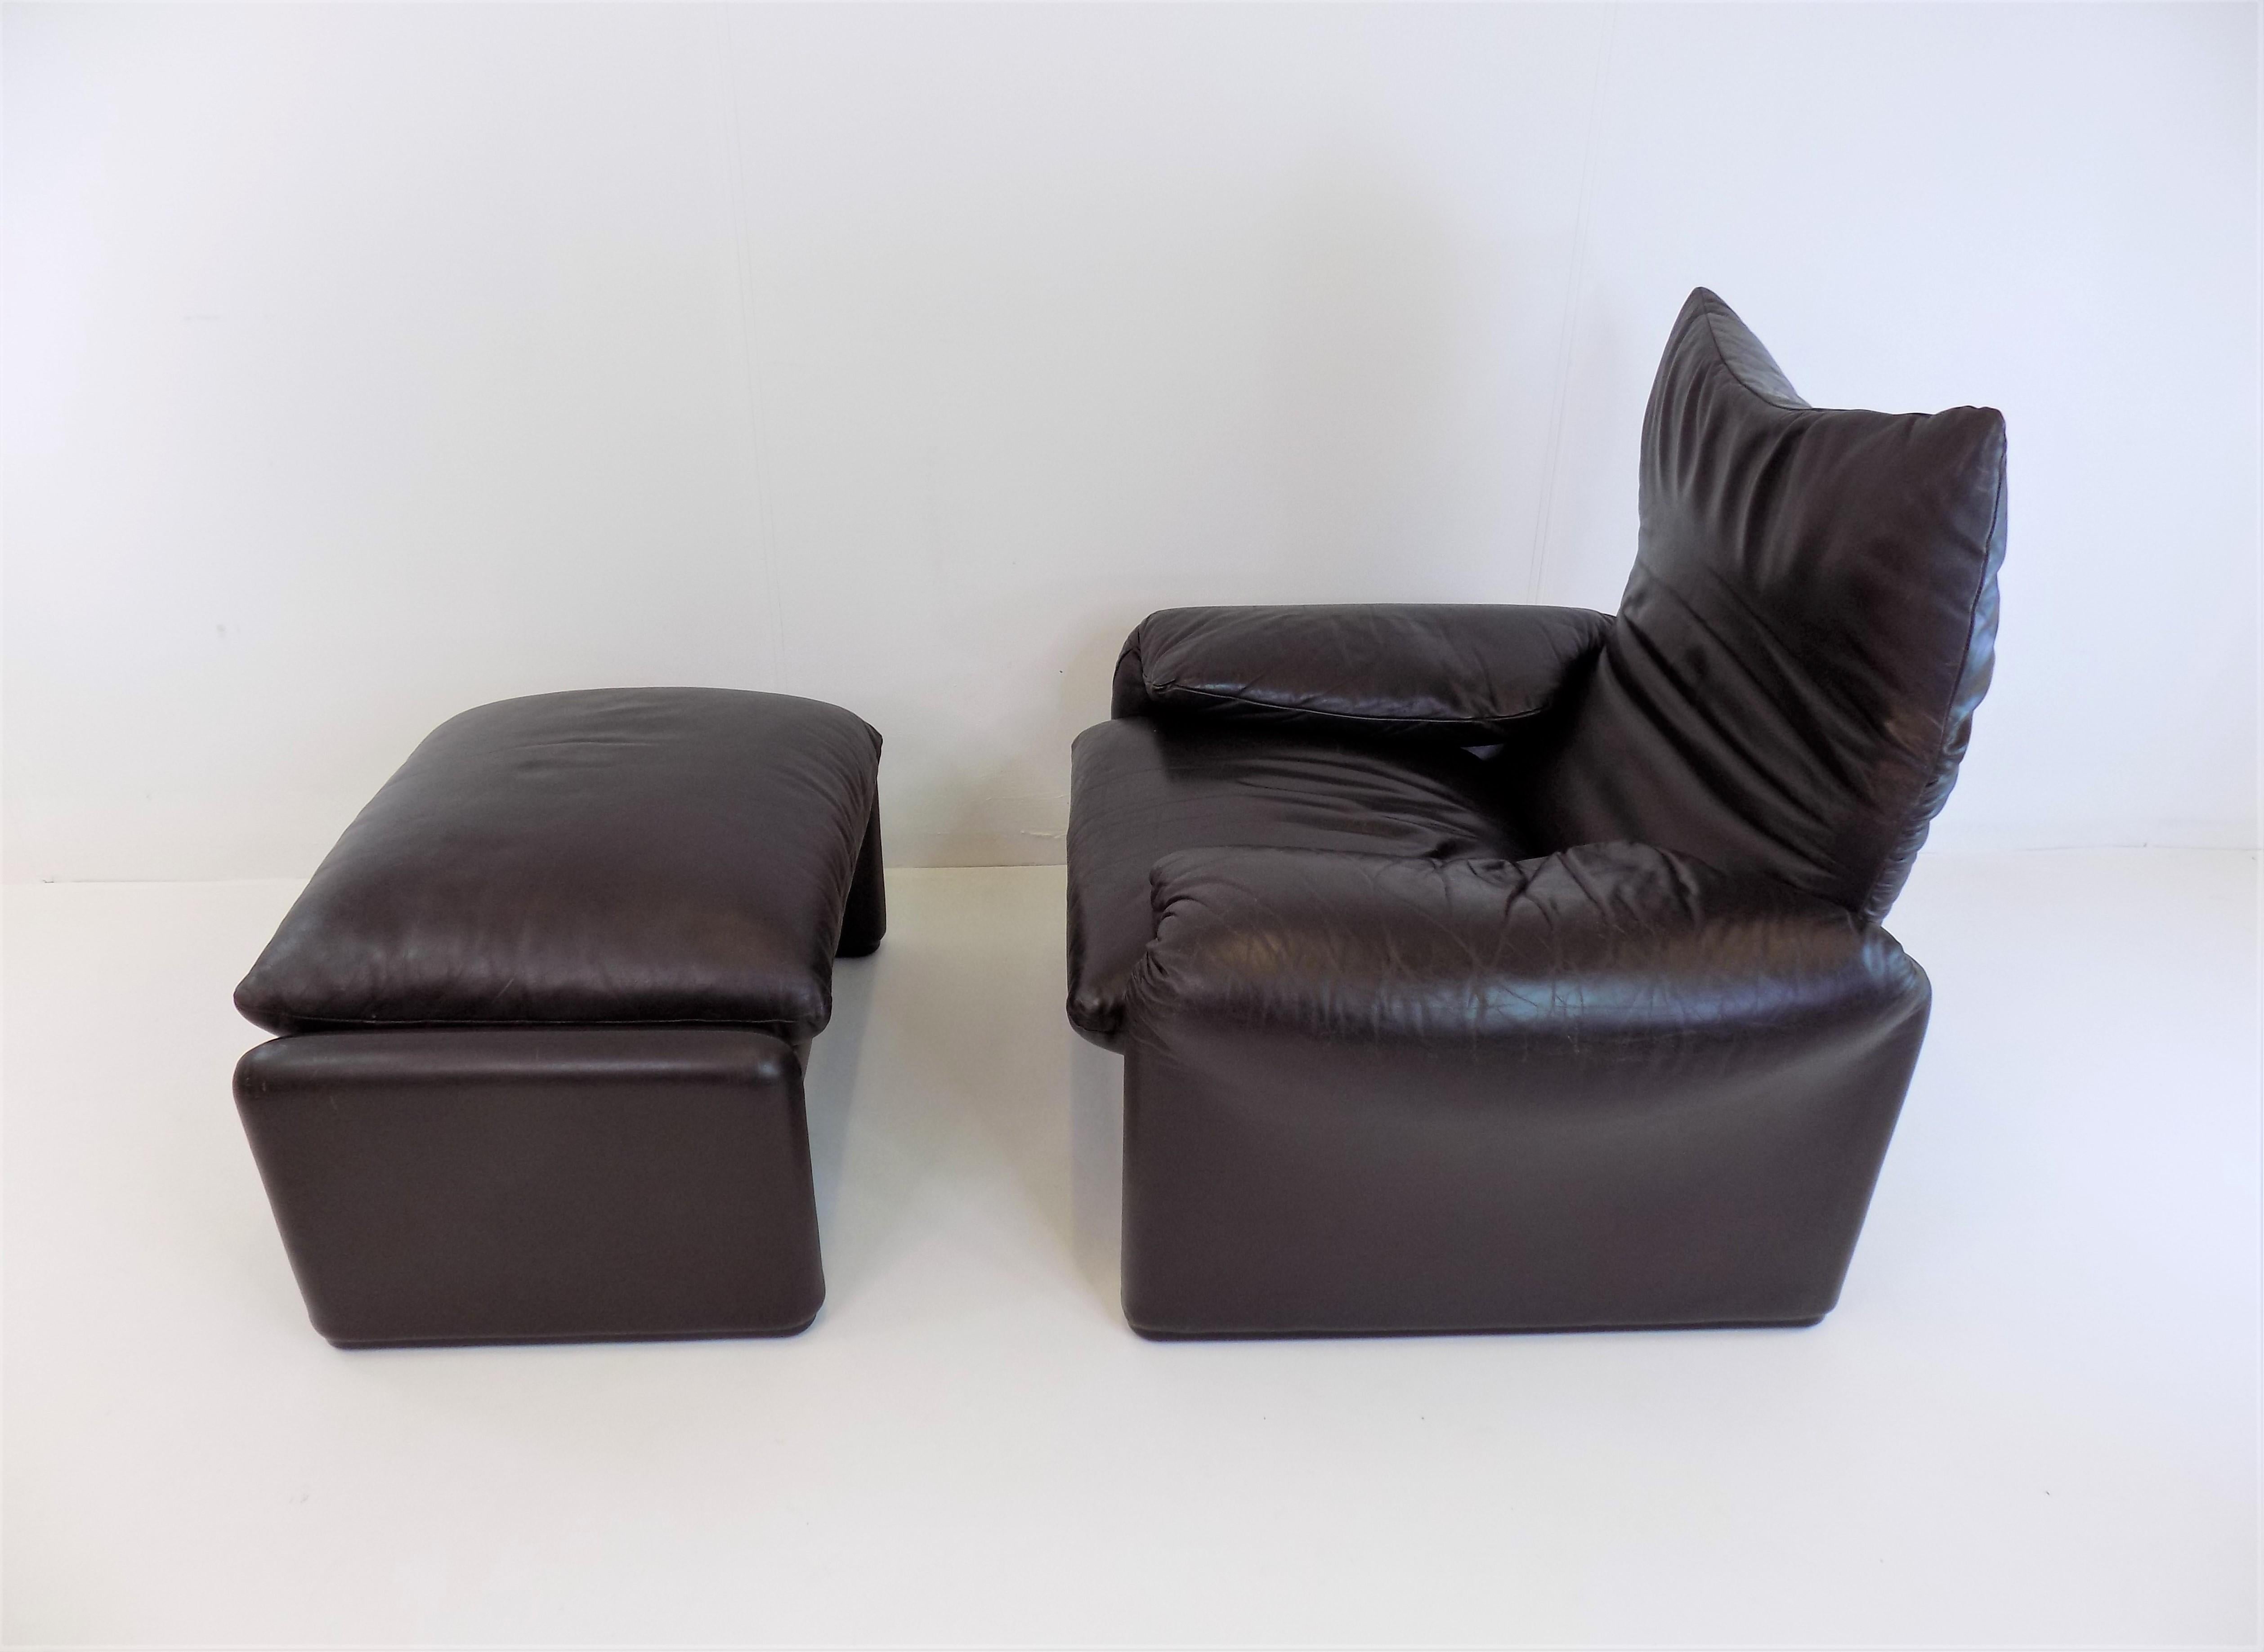 Cassina Maralunga Leather Armchair with Ottoman by Vico Magistretti 2